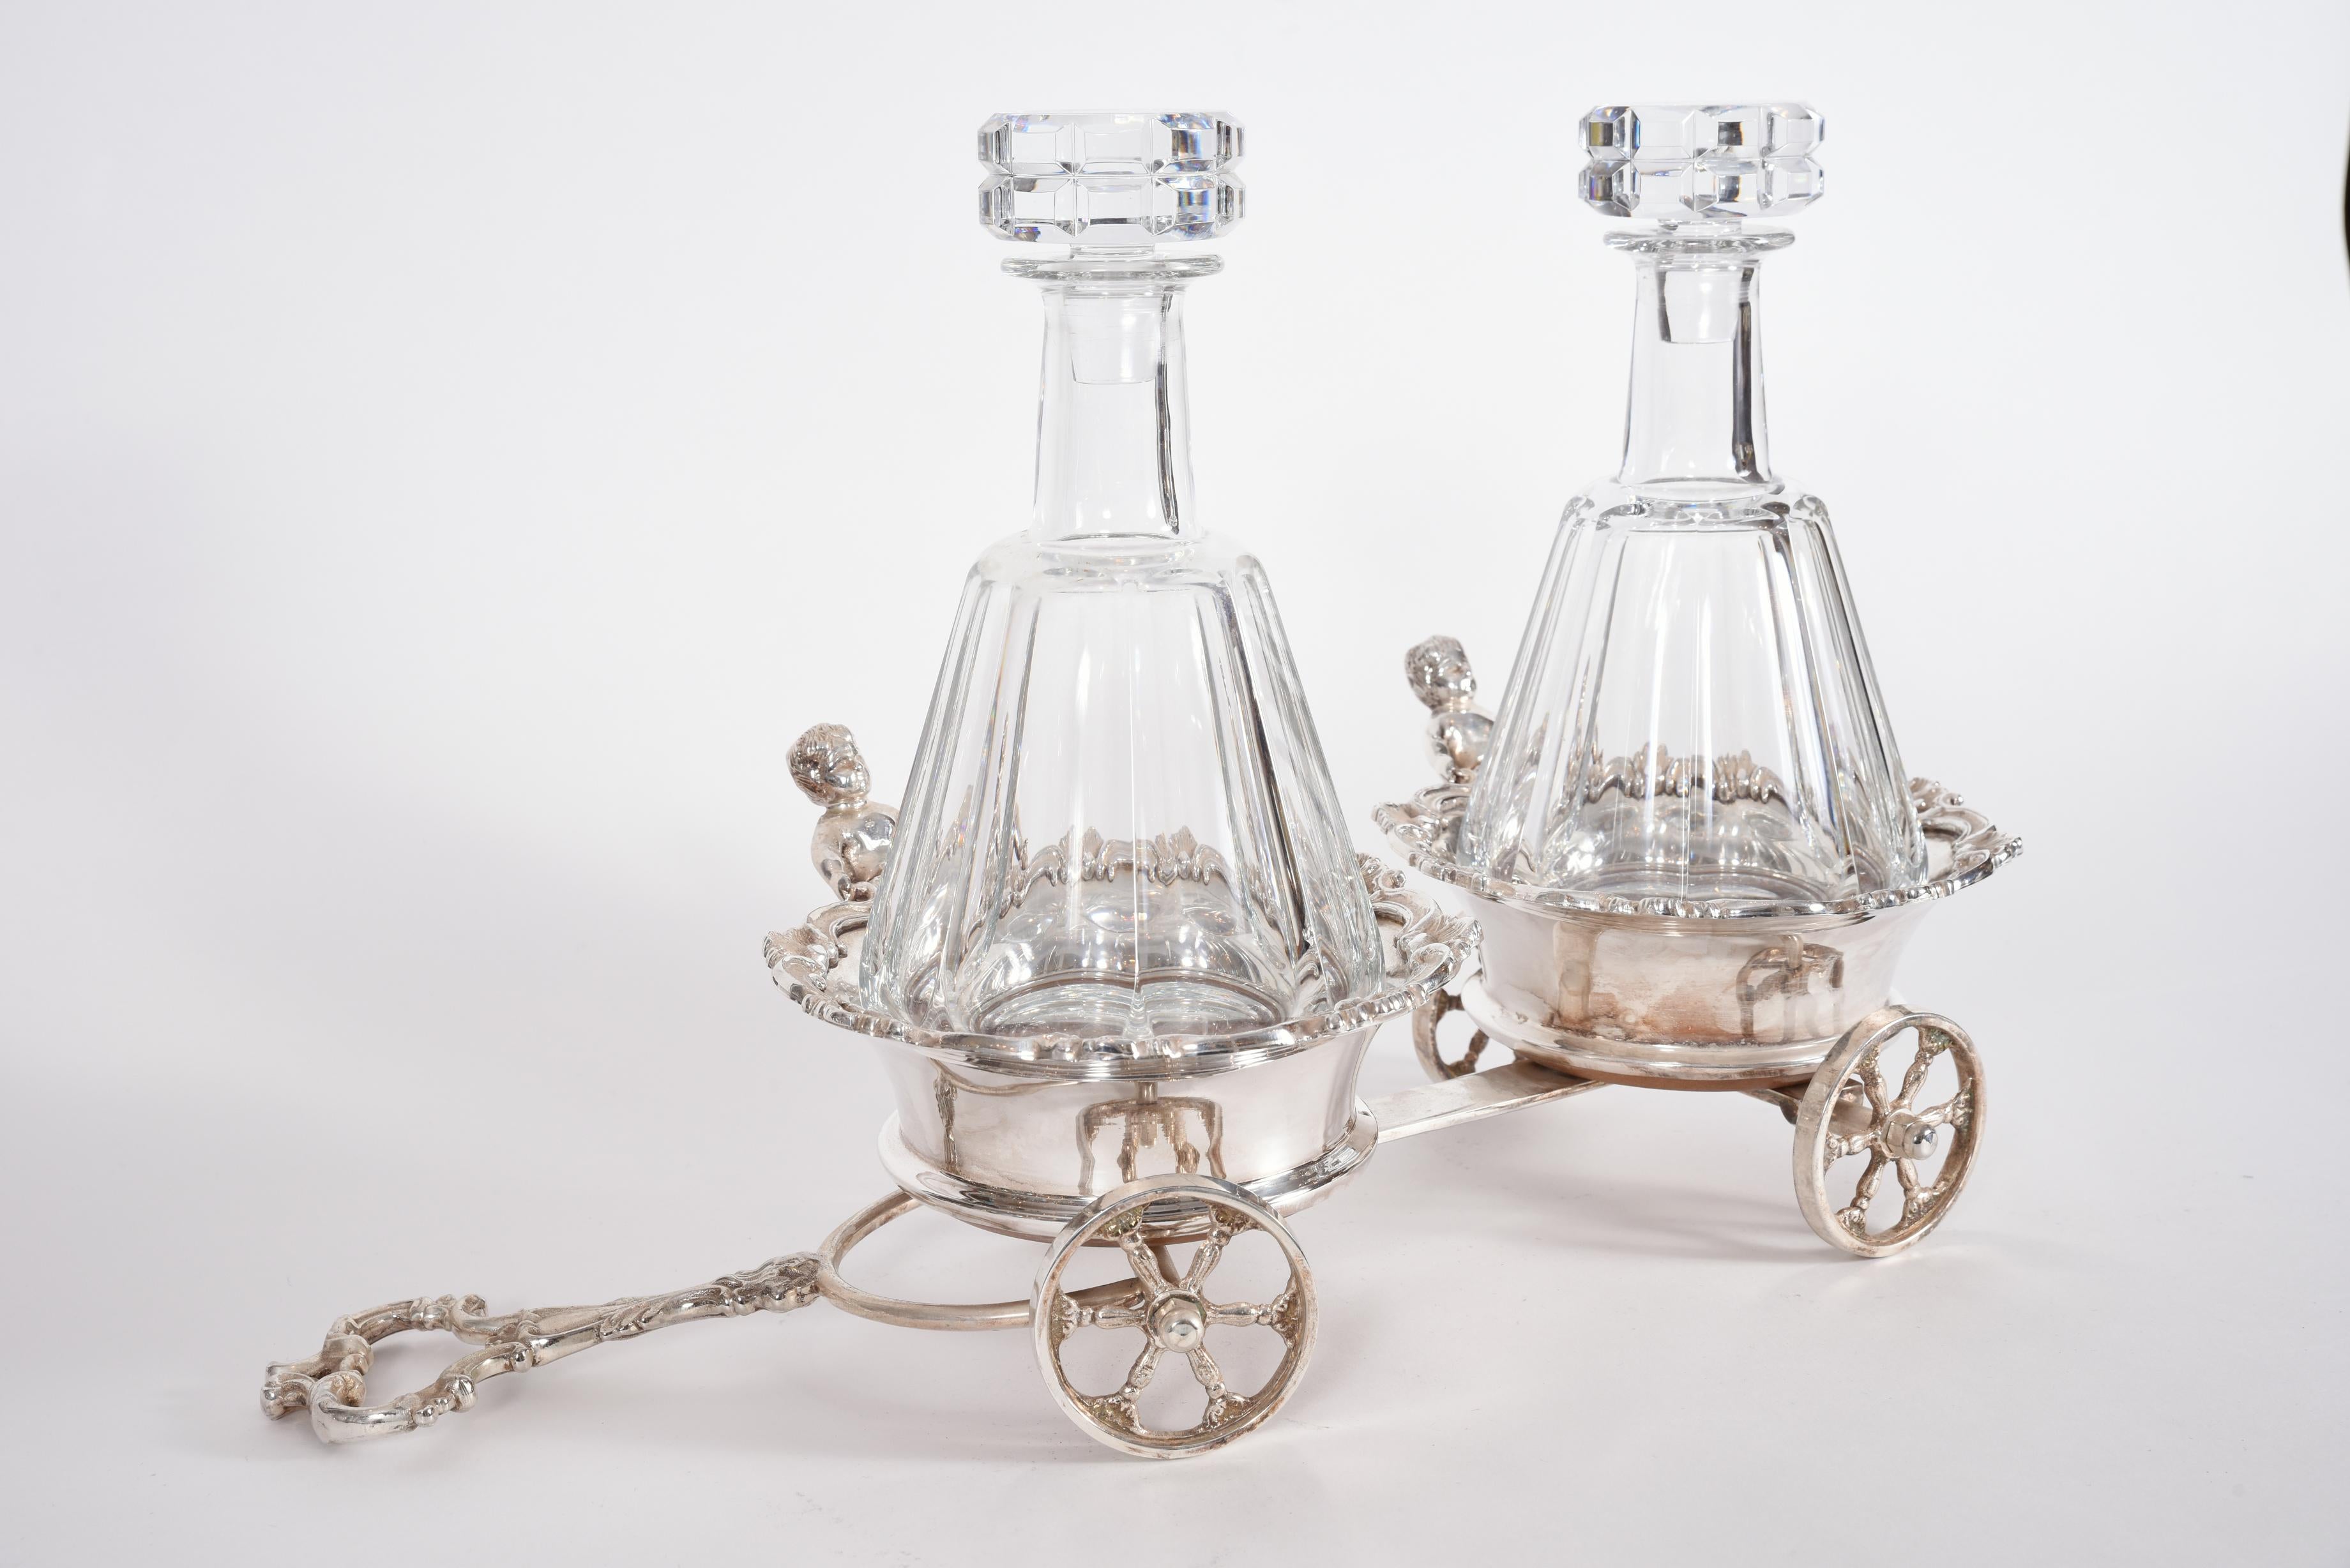 20th Century Pair of Cut Crystal Drinks Baccarat Decanters